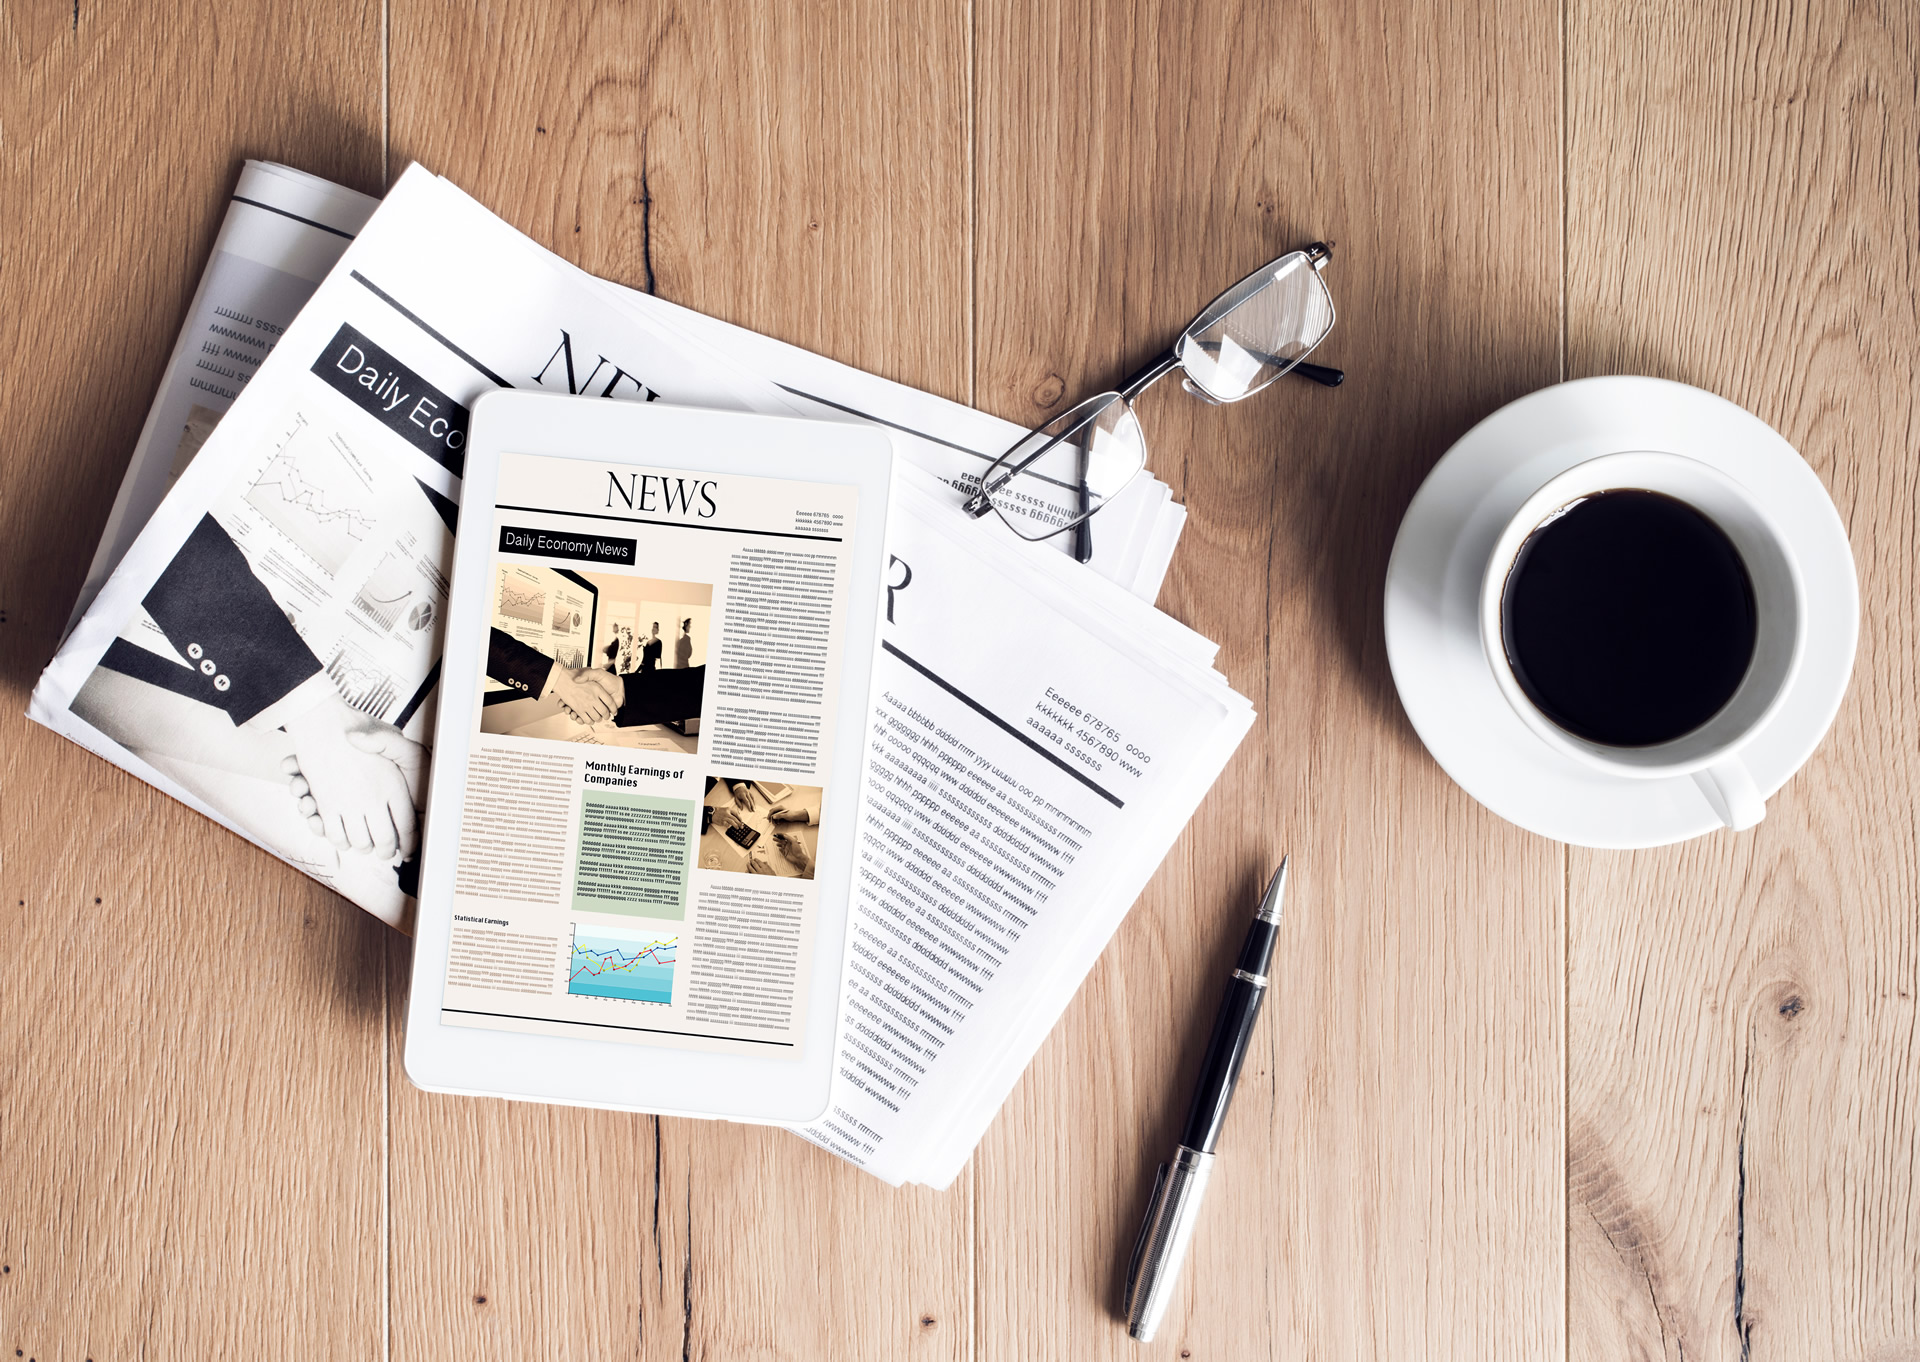 Newspaper with tablet and a cup of coffee on a wooden surface